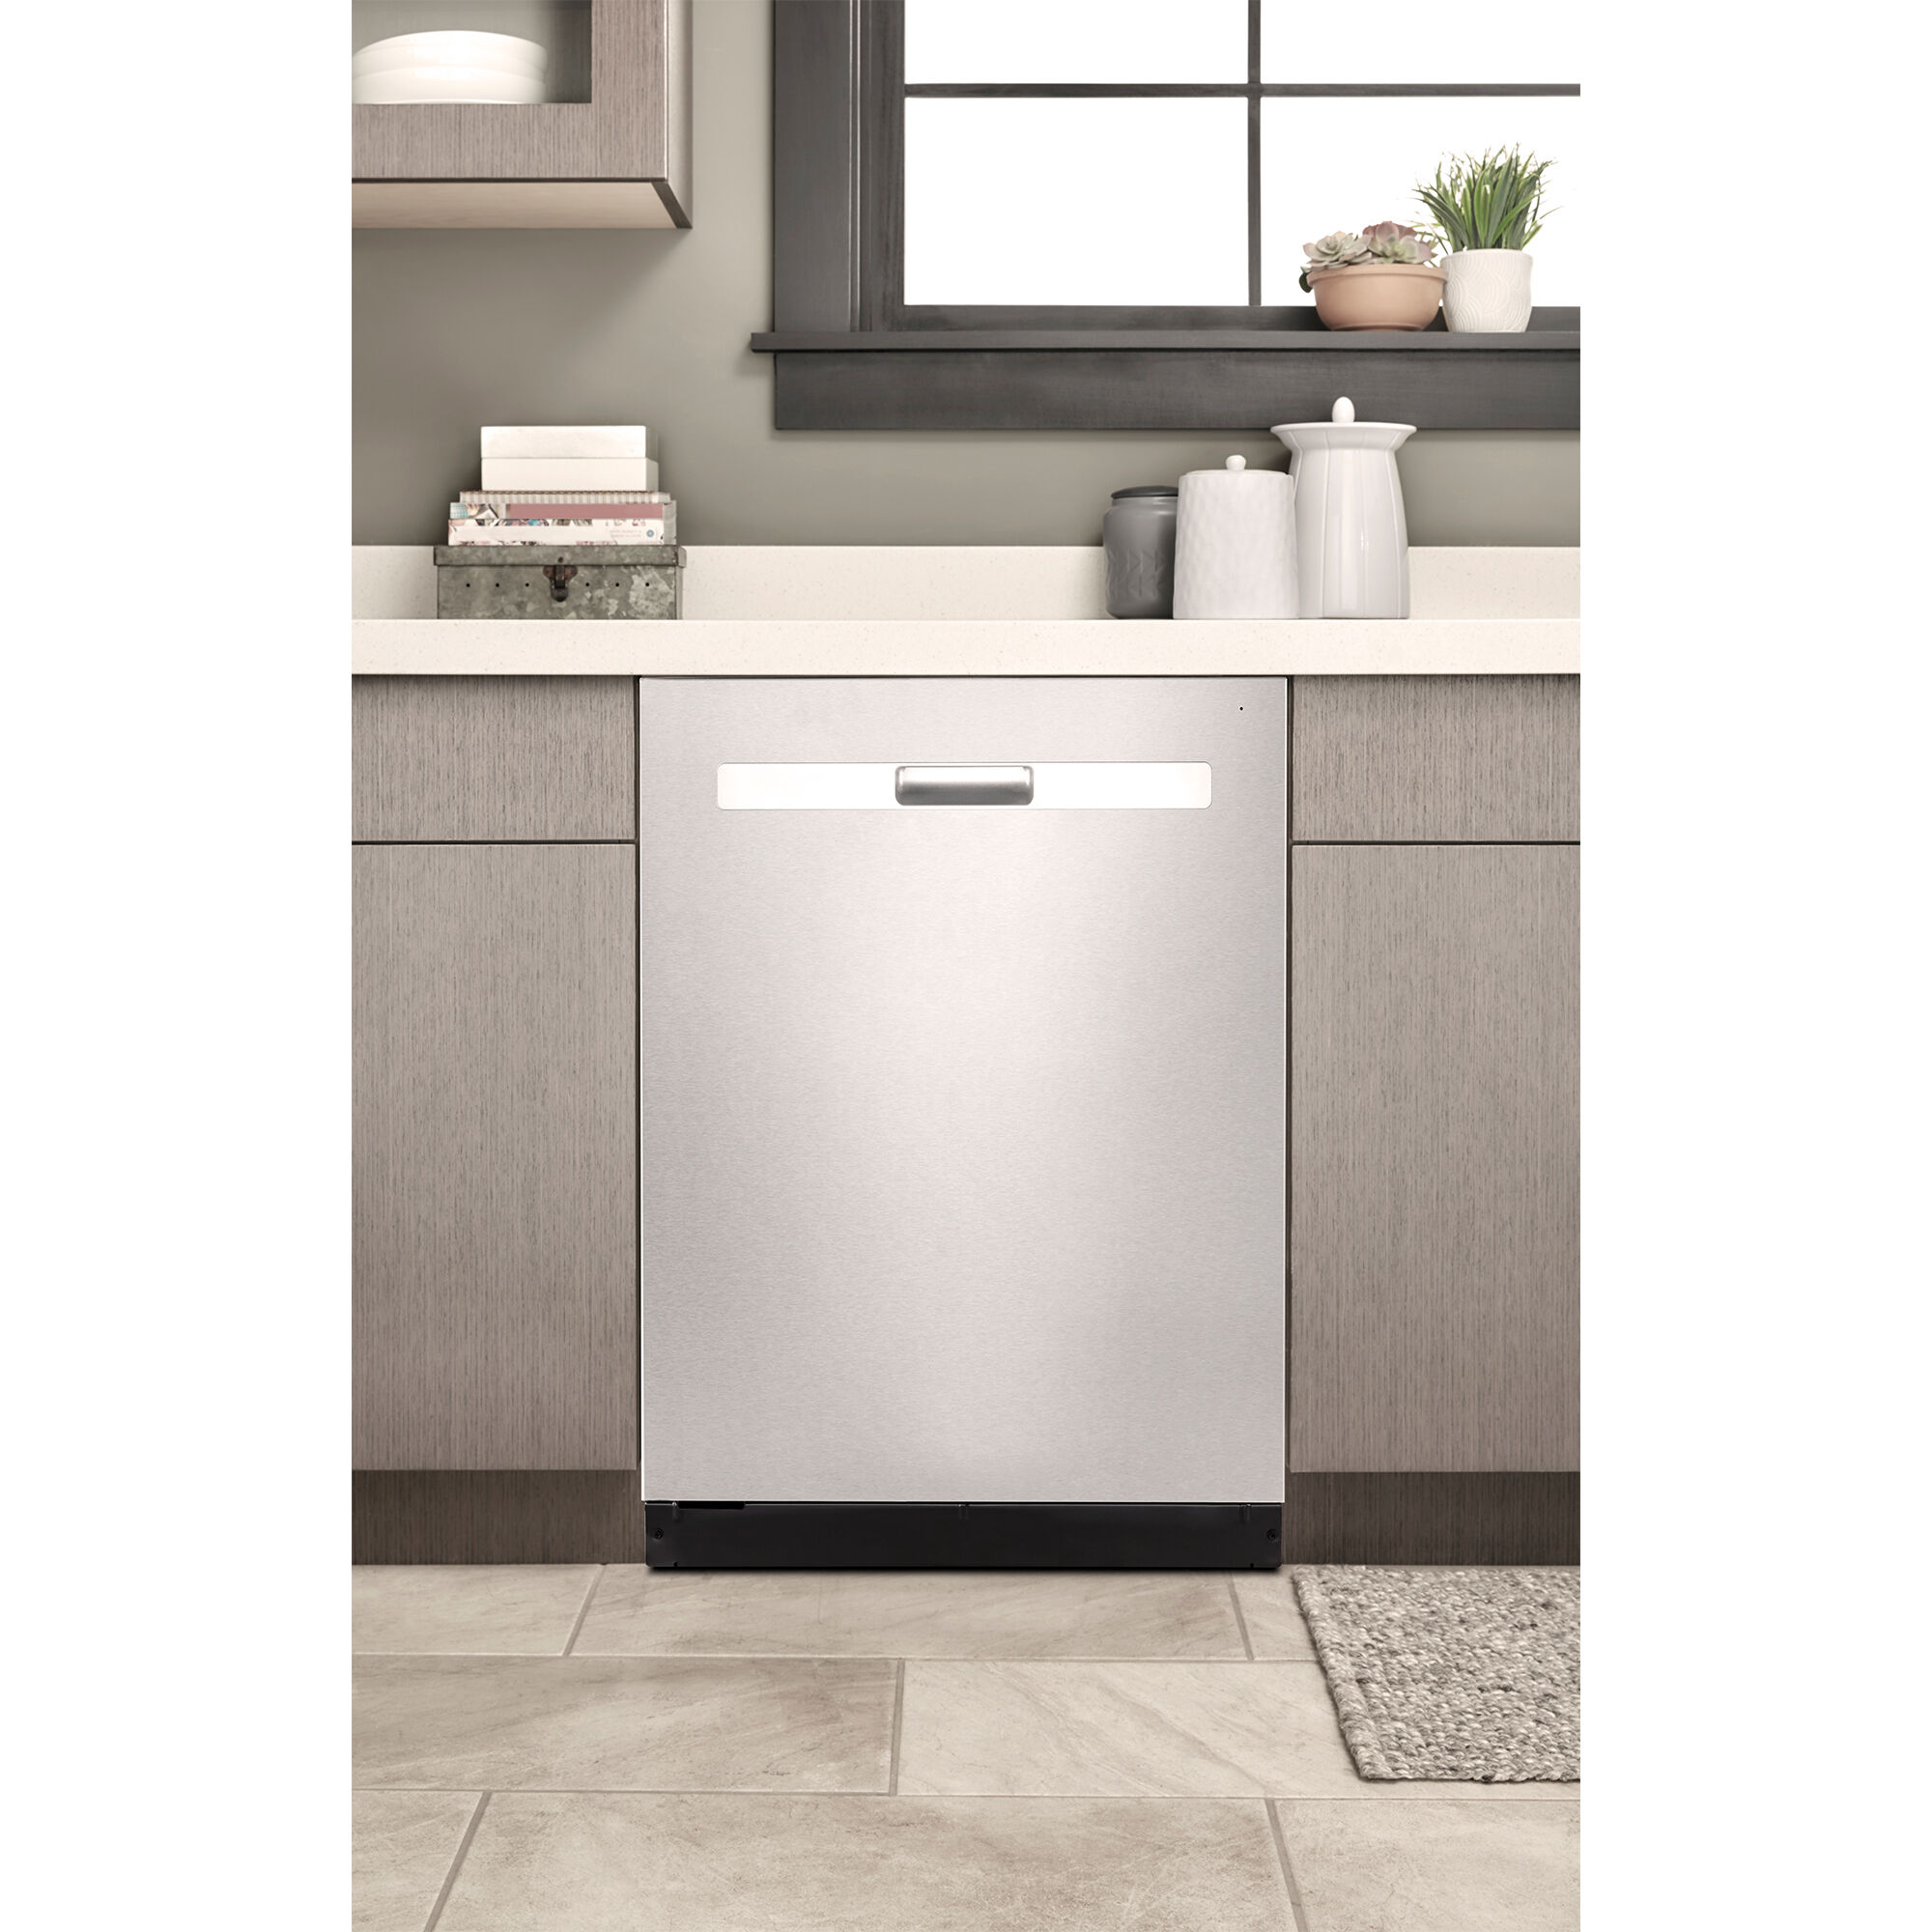 Whirlpool 24 in. Built-In Dishwasher with Top Control, 51 dBA 